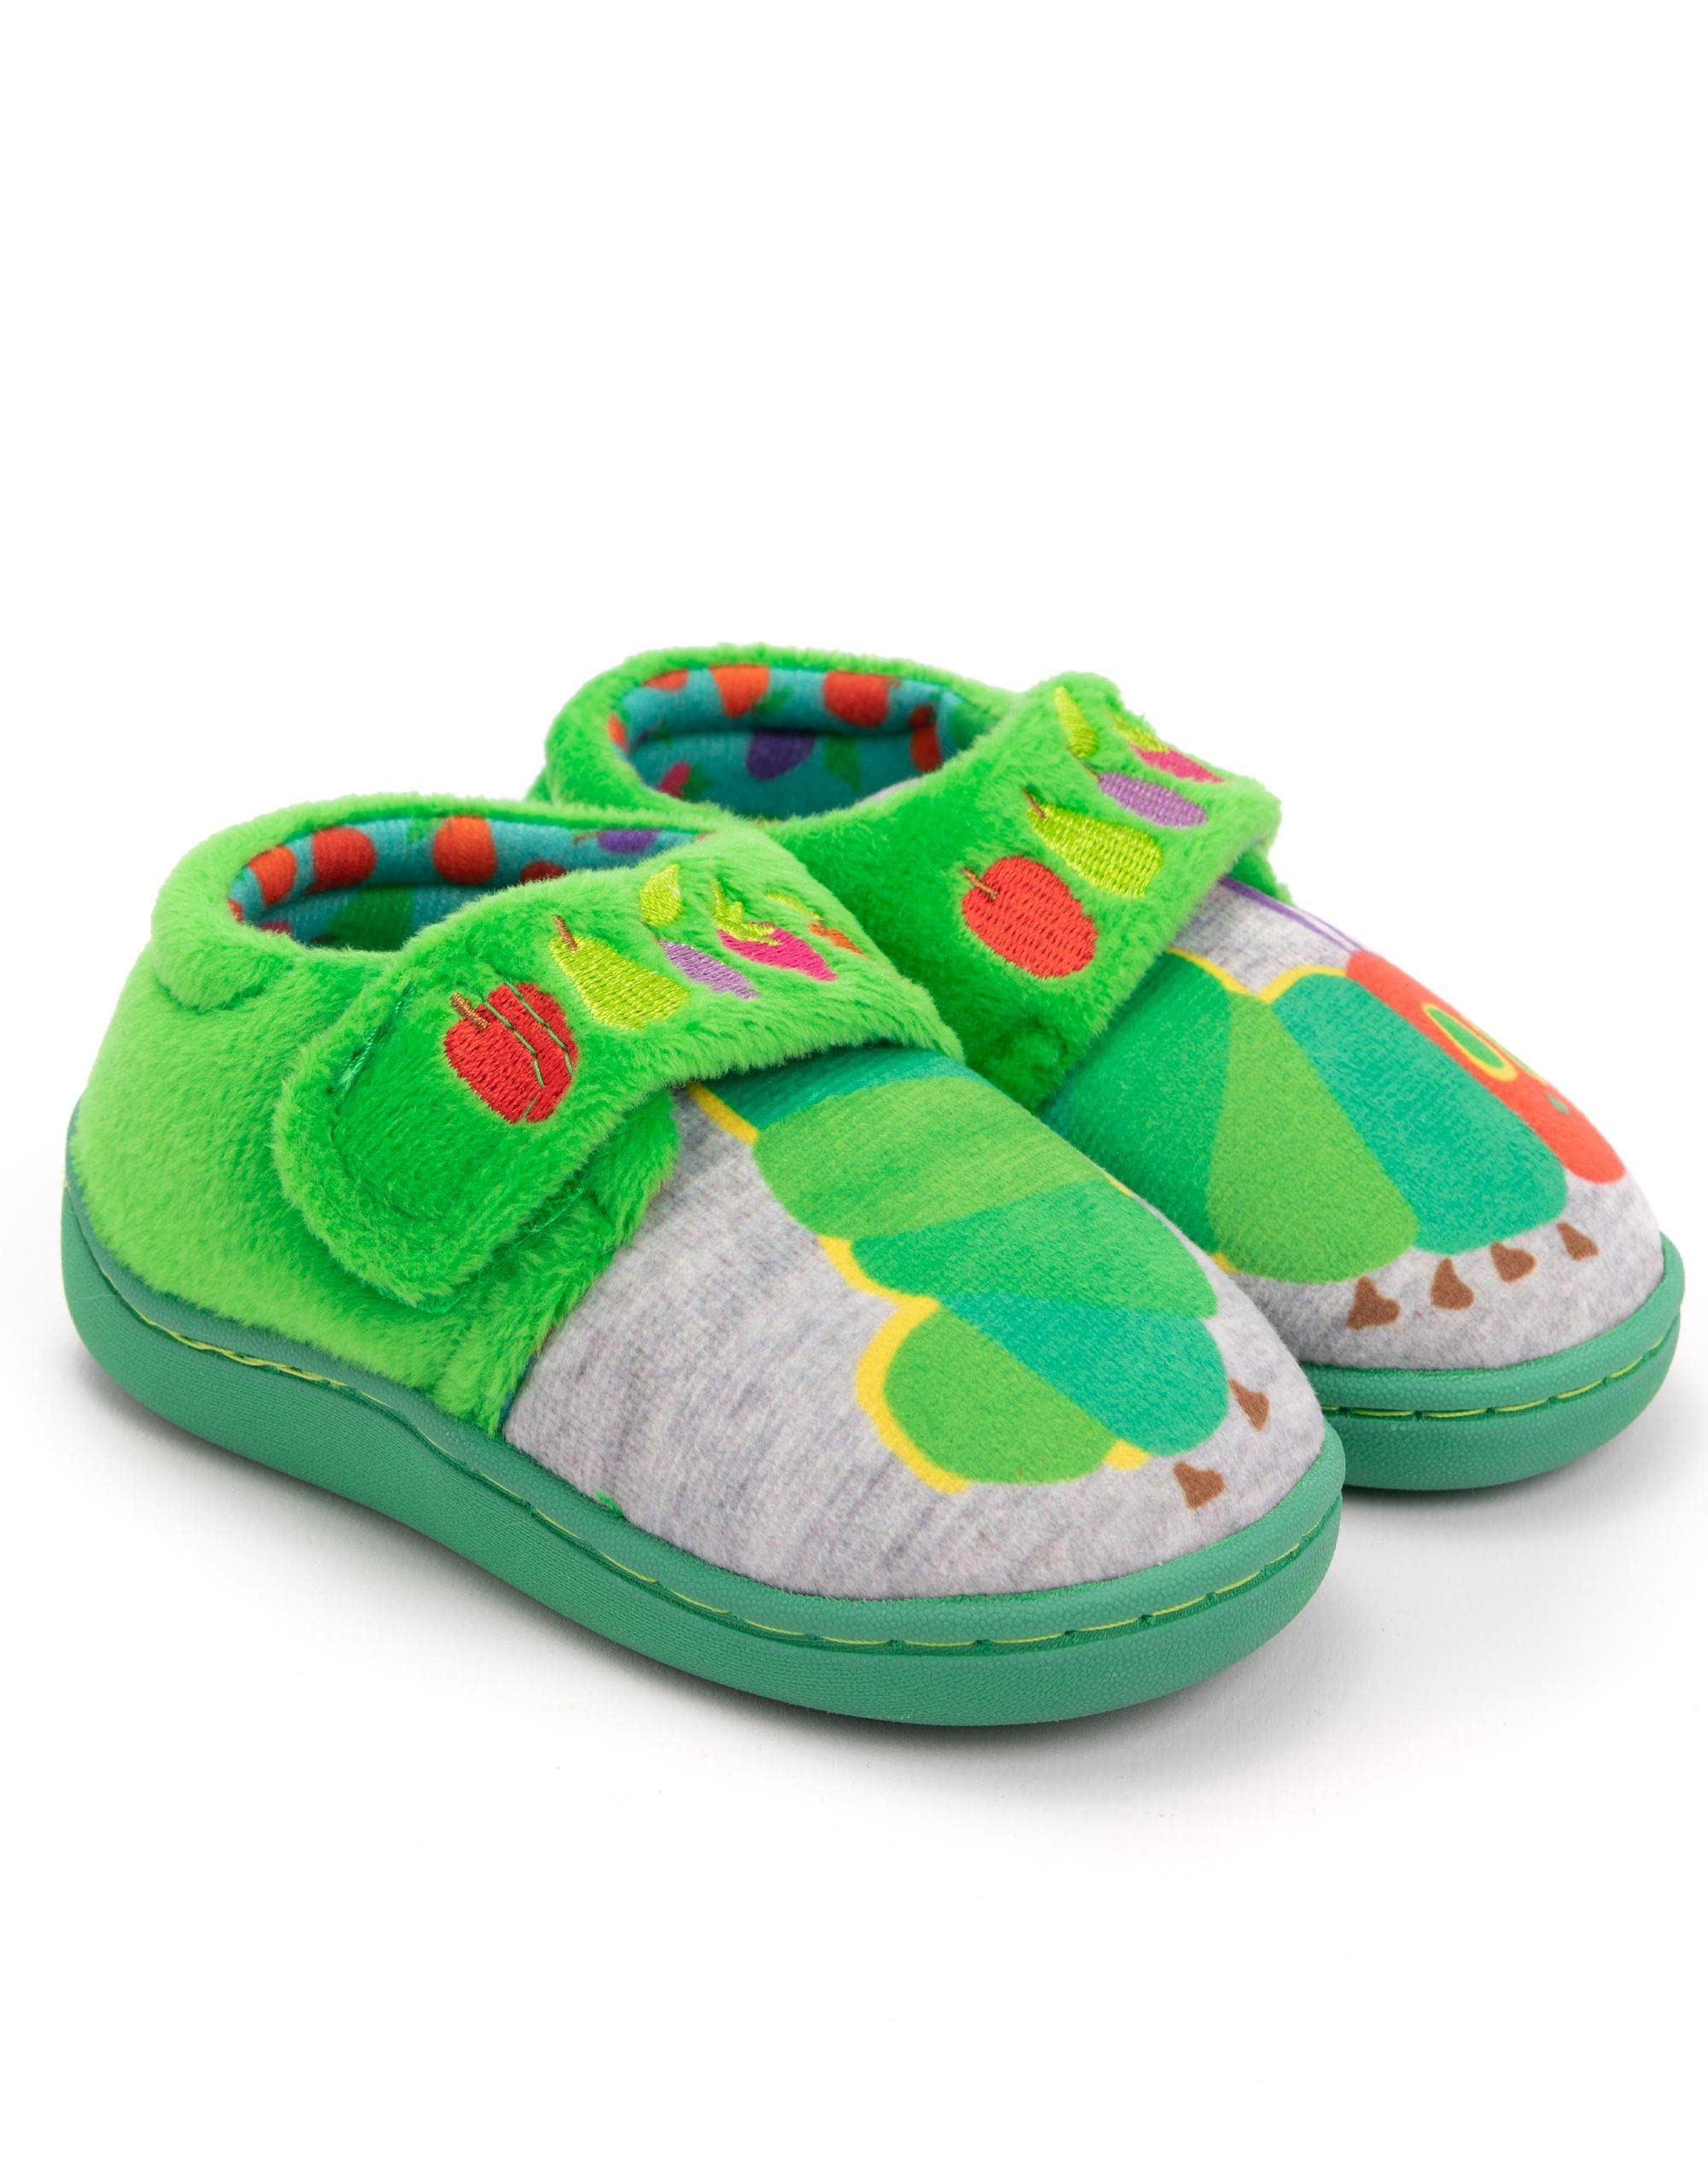 Eric Carle The Very Hungry Caterpillar Slippers Kids Toddlers Girls Book Shoes 7.5 US Toddler